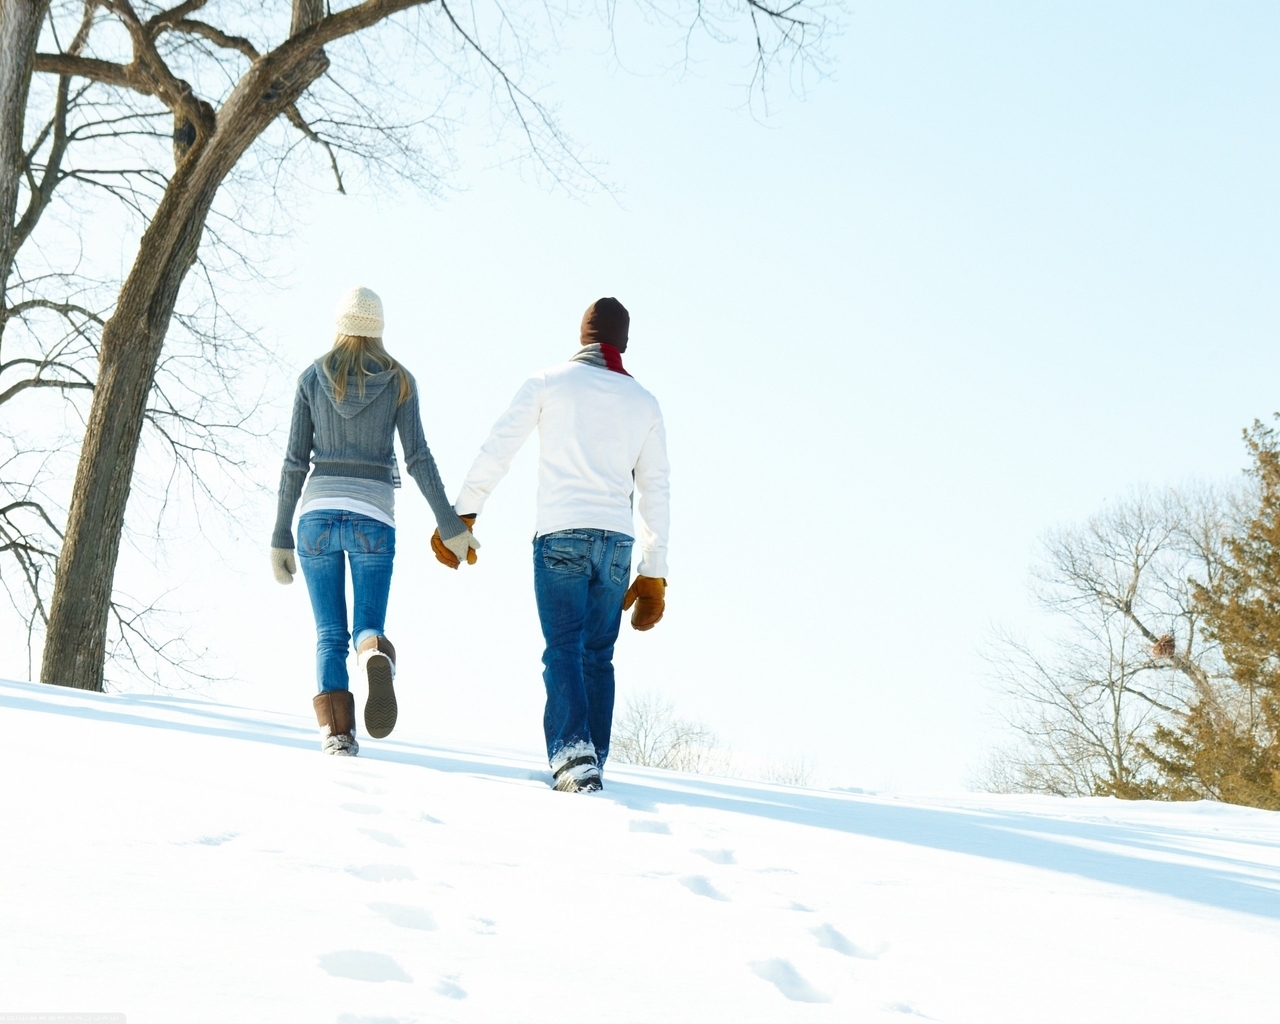 Image: Pair, guy, girl, walk, back, coming, hands, hat, winter, snow, trees